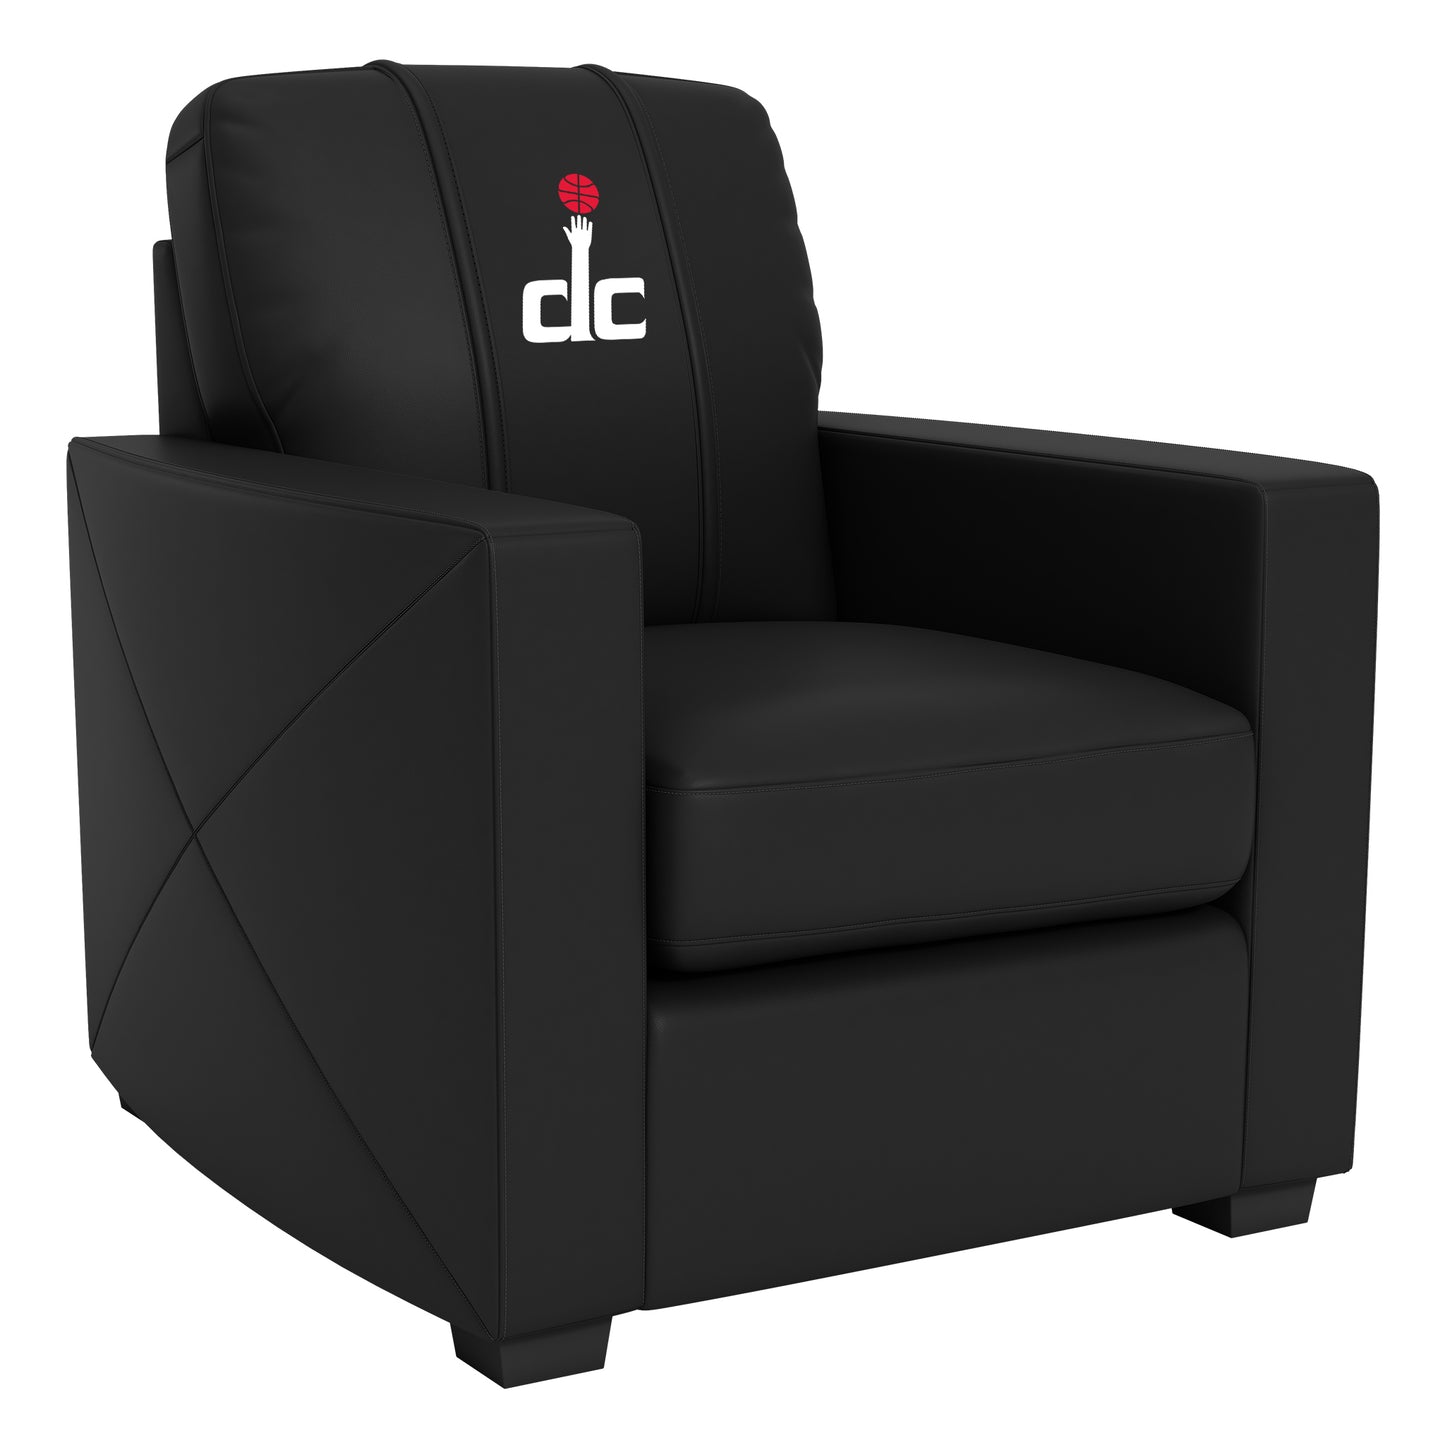 Silver Club Chair with Washington Wizards Secondary